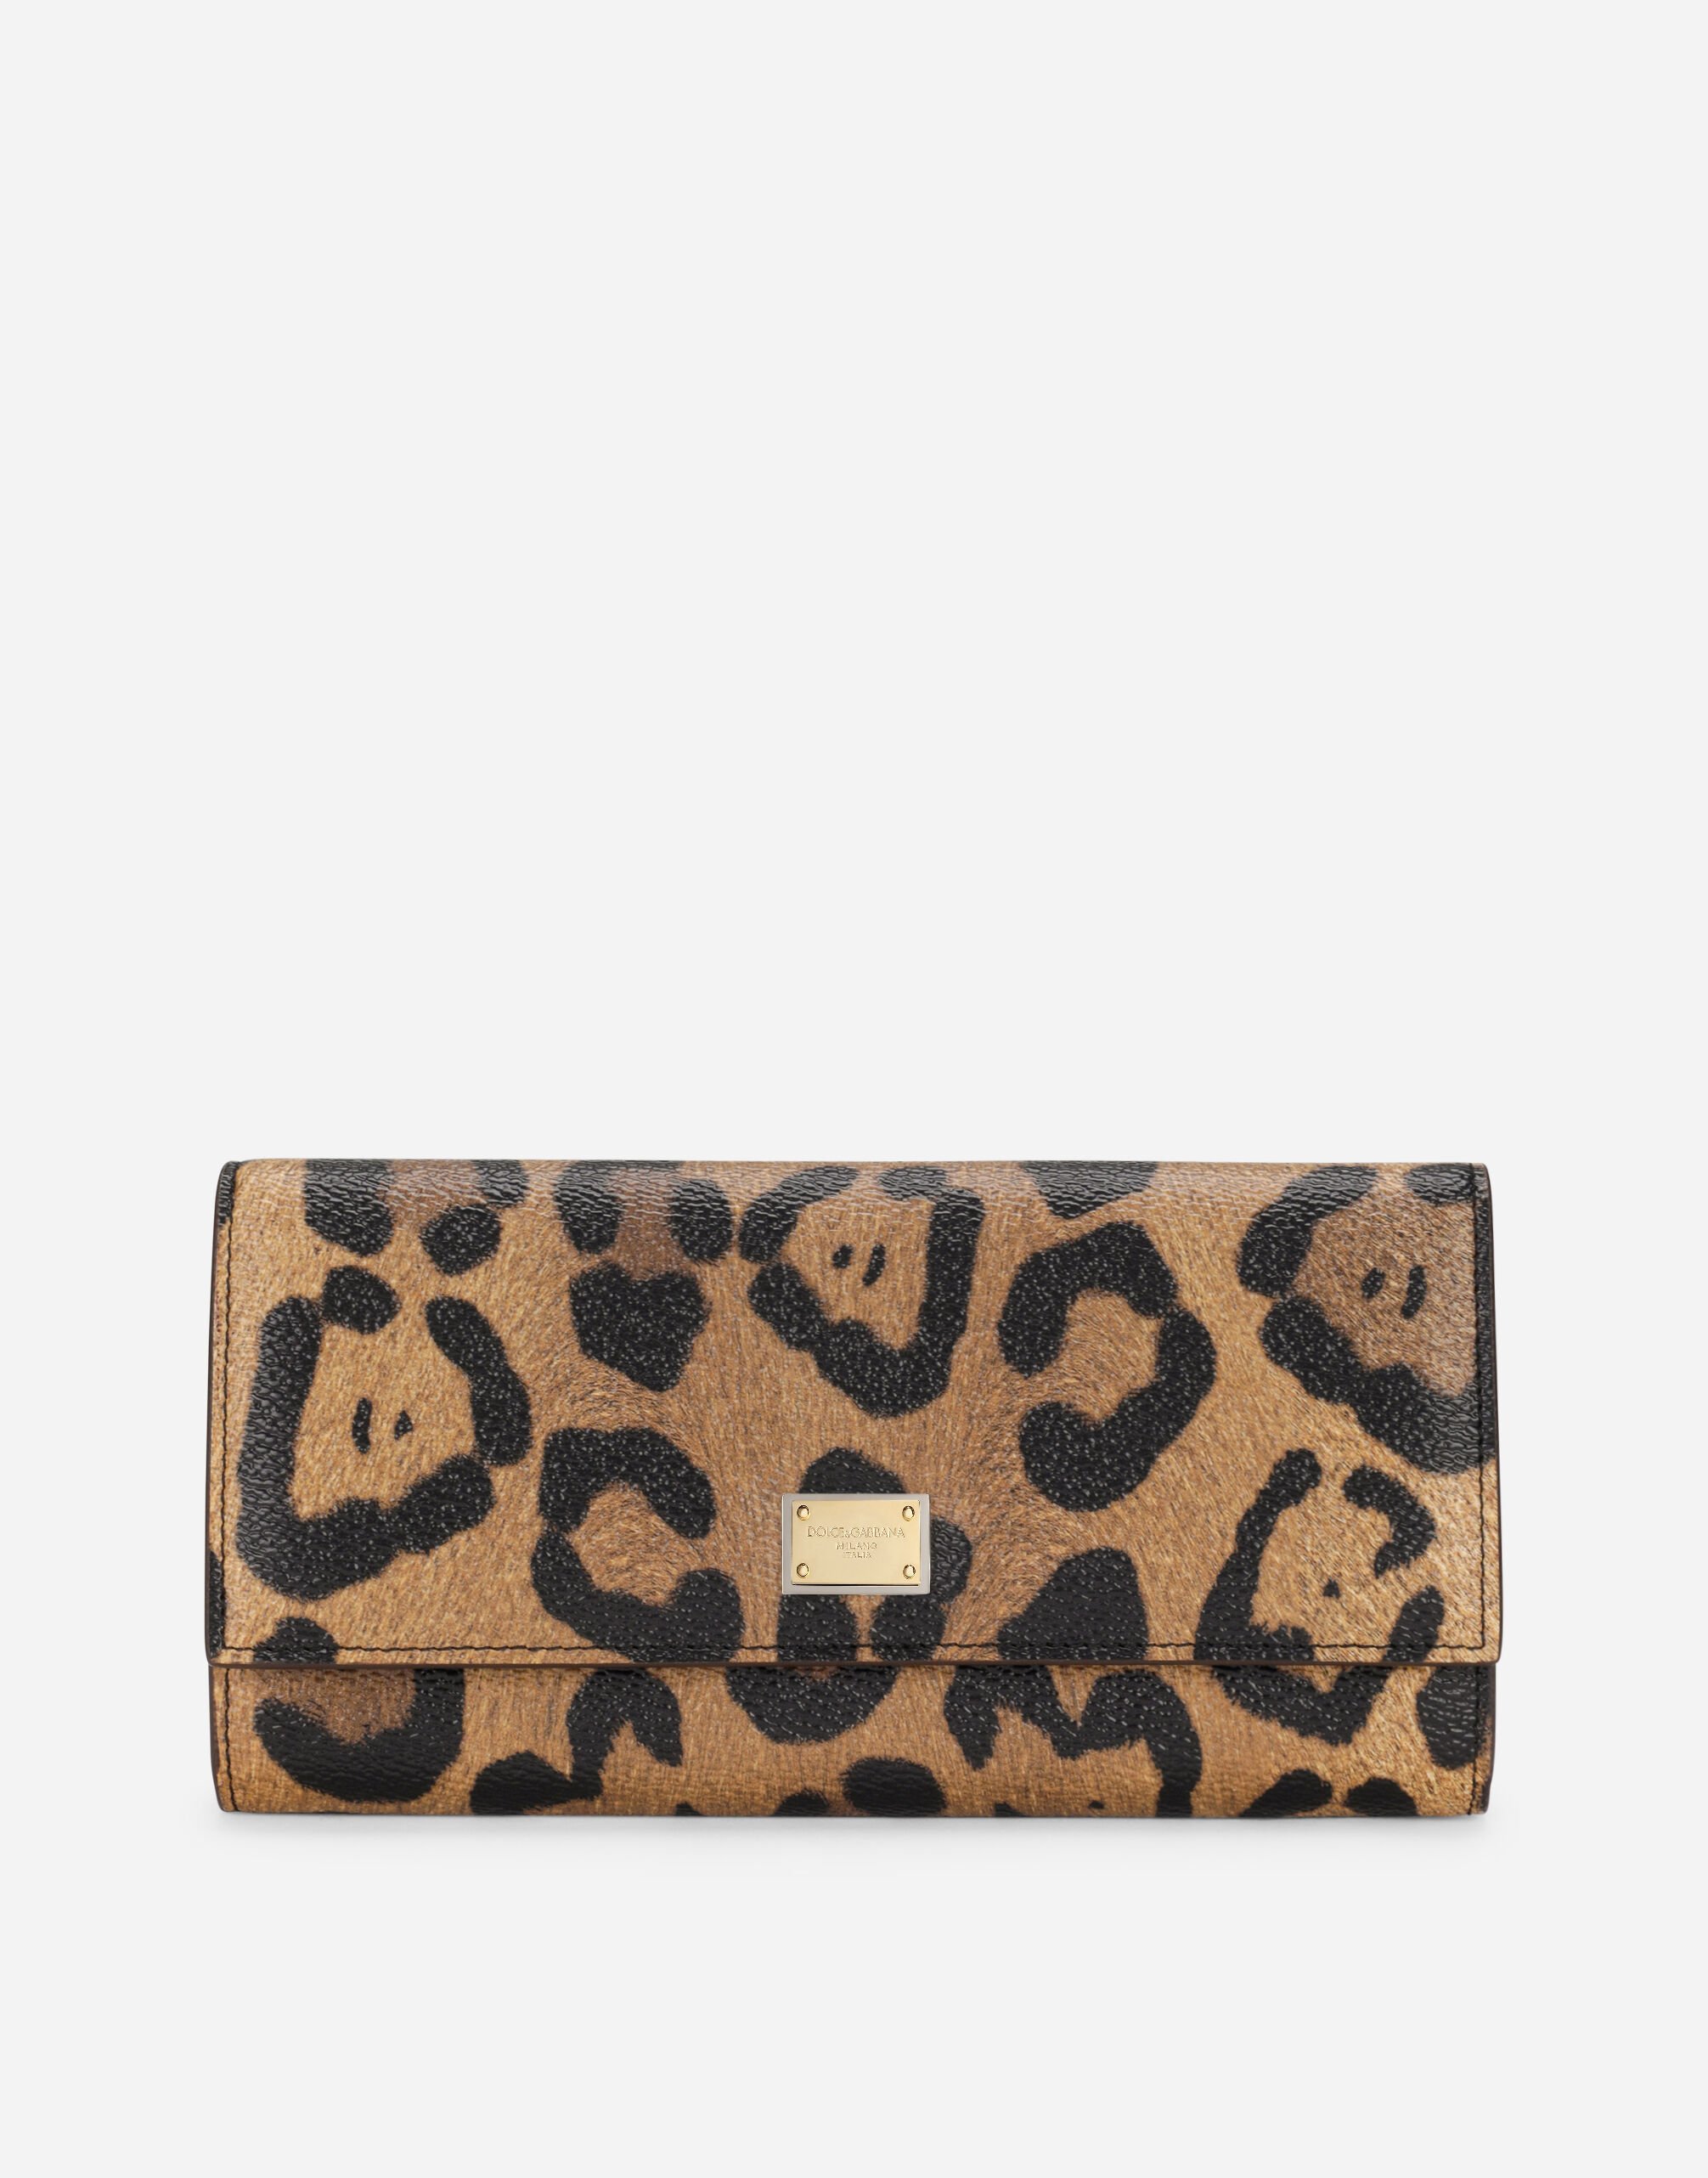 Dolce & Gabbana Leopard-print Crespo continental wallet with branded plate Multicolor BB5835AW384